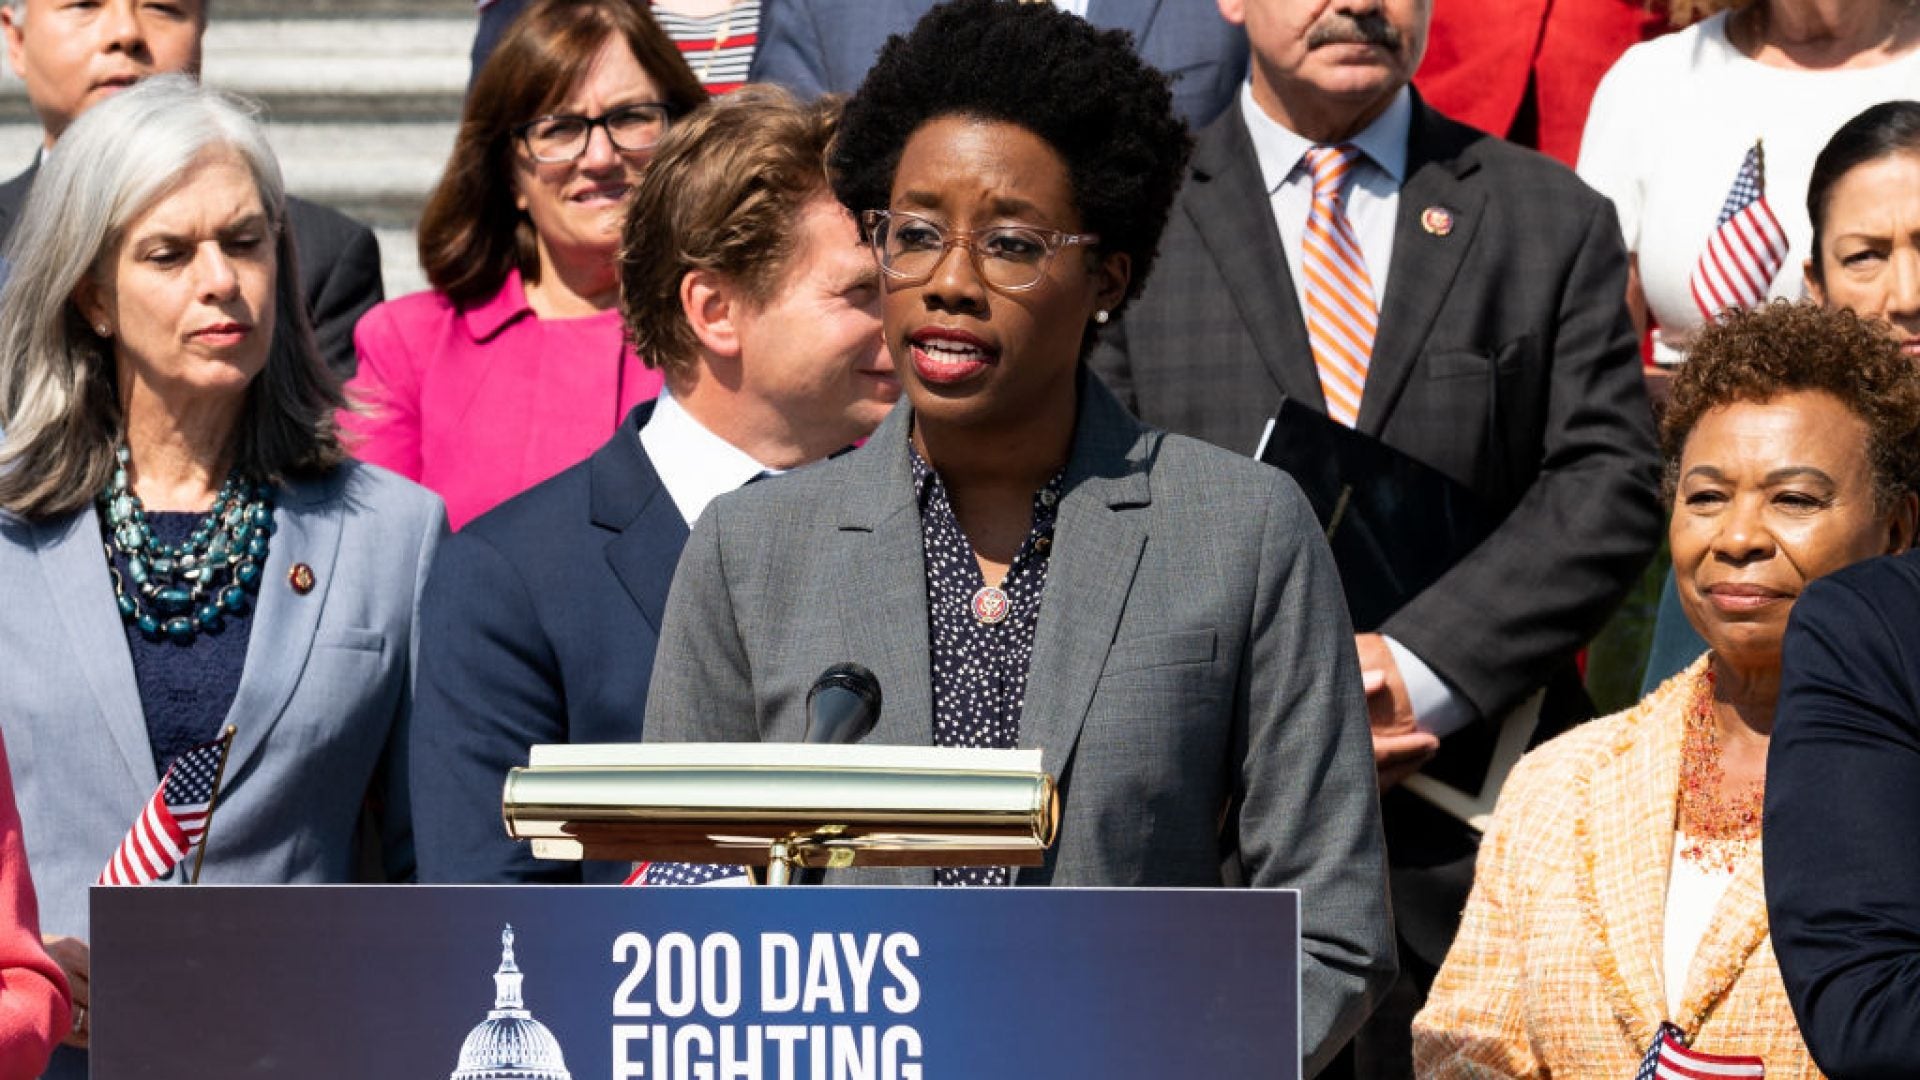 Lauren Underwood Wins Reelection To U.S. House In Illinois' 14th Congressional District